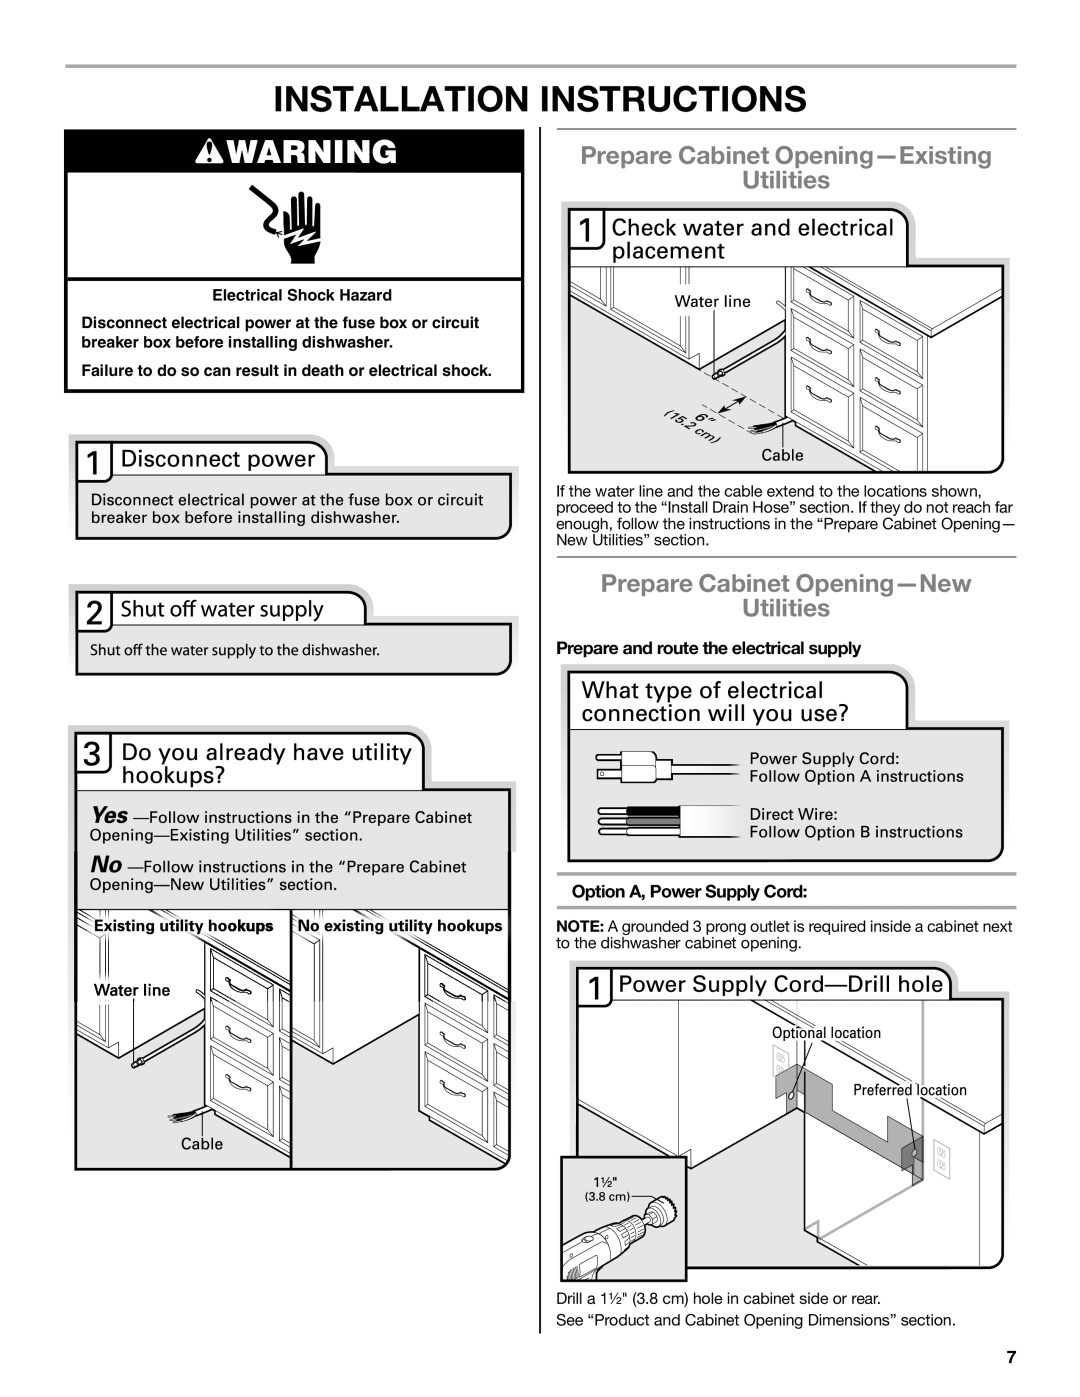 Maytag W10532762A Installation Instructions, Prepare Cabinet Opening—Existing Utilities, Option A, Power Supply Cord 